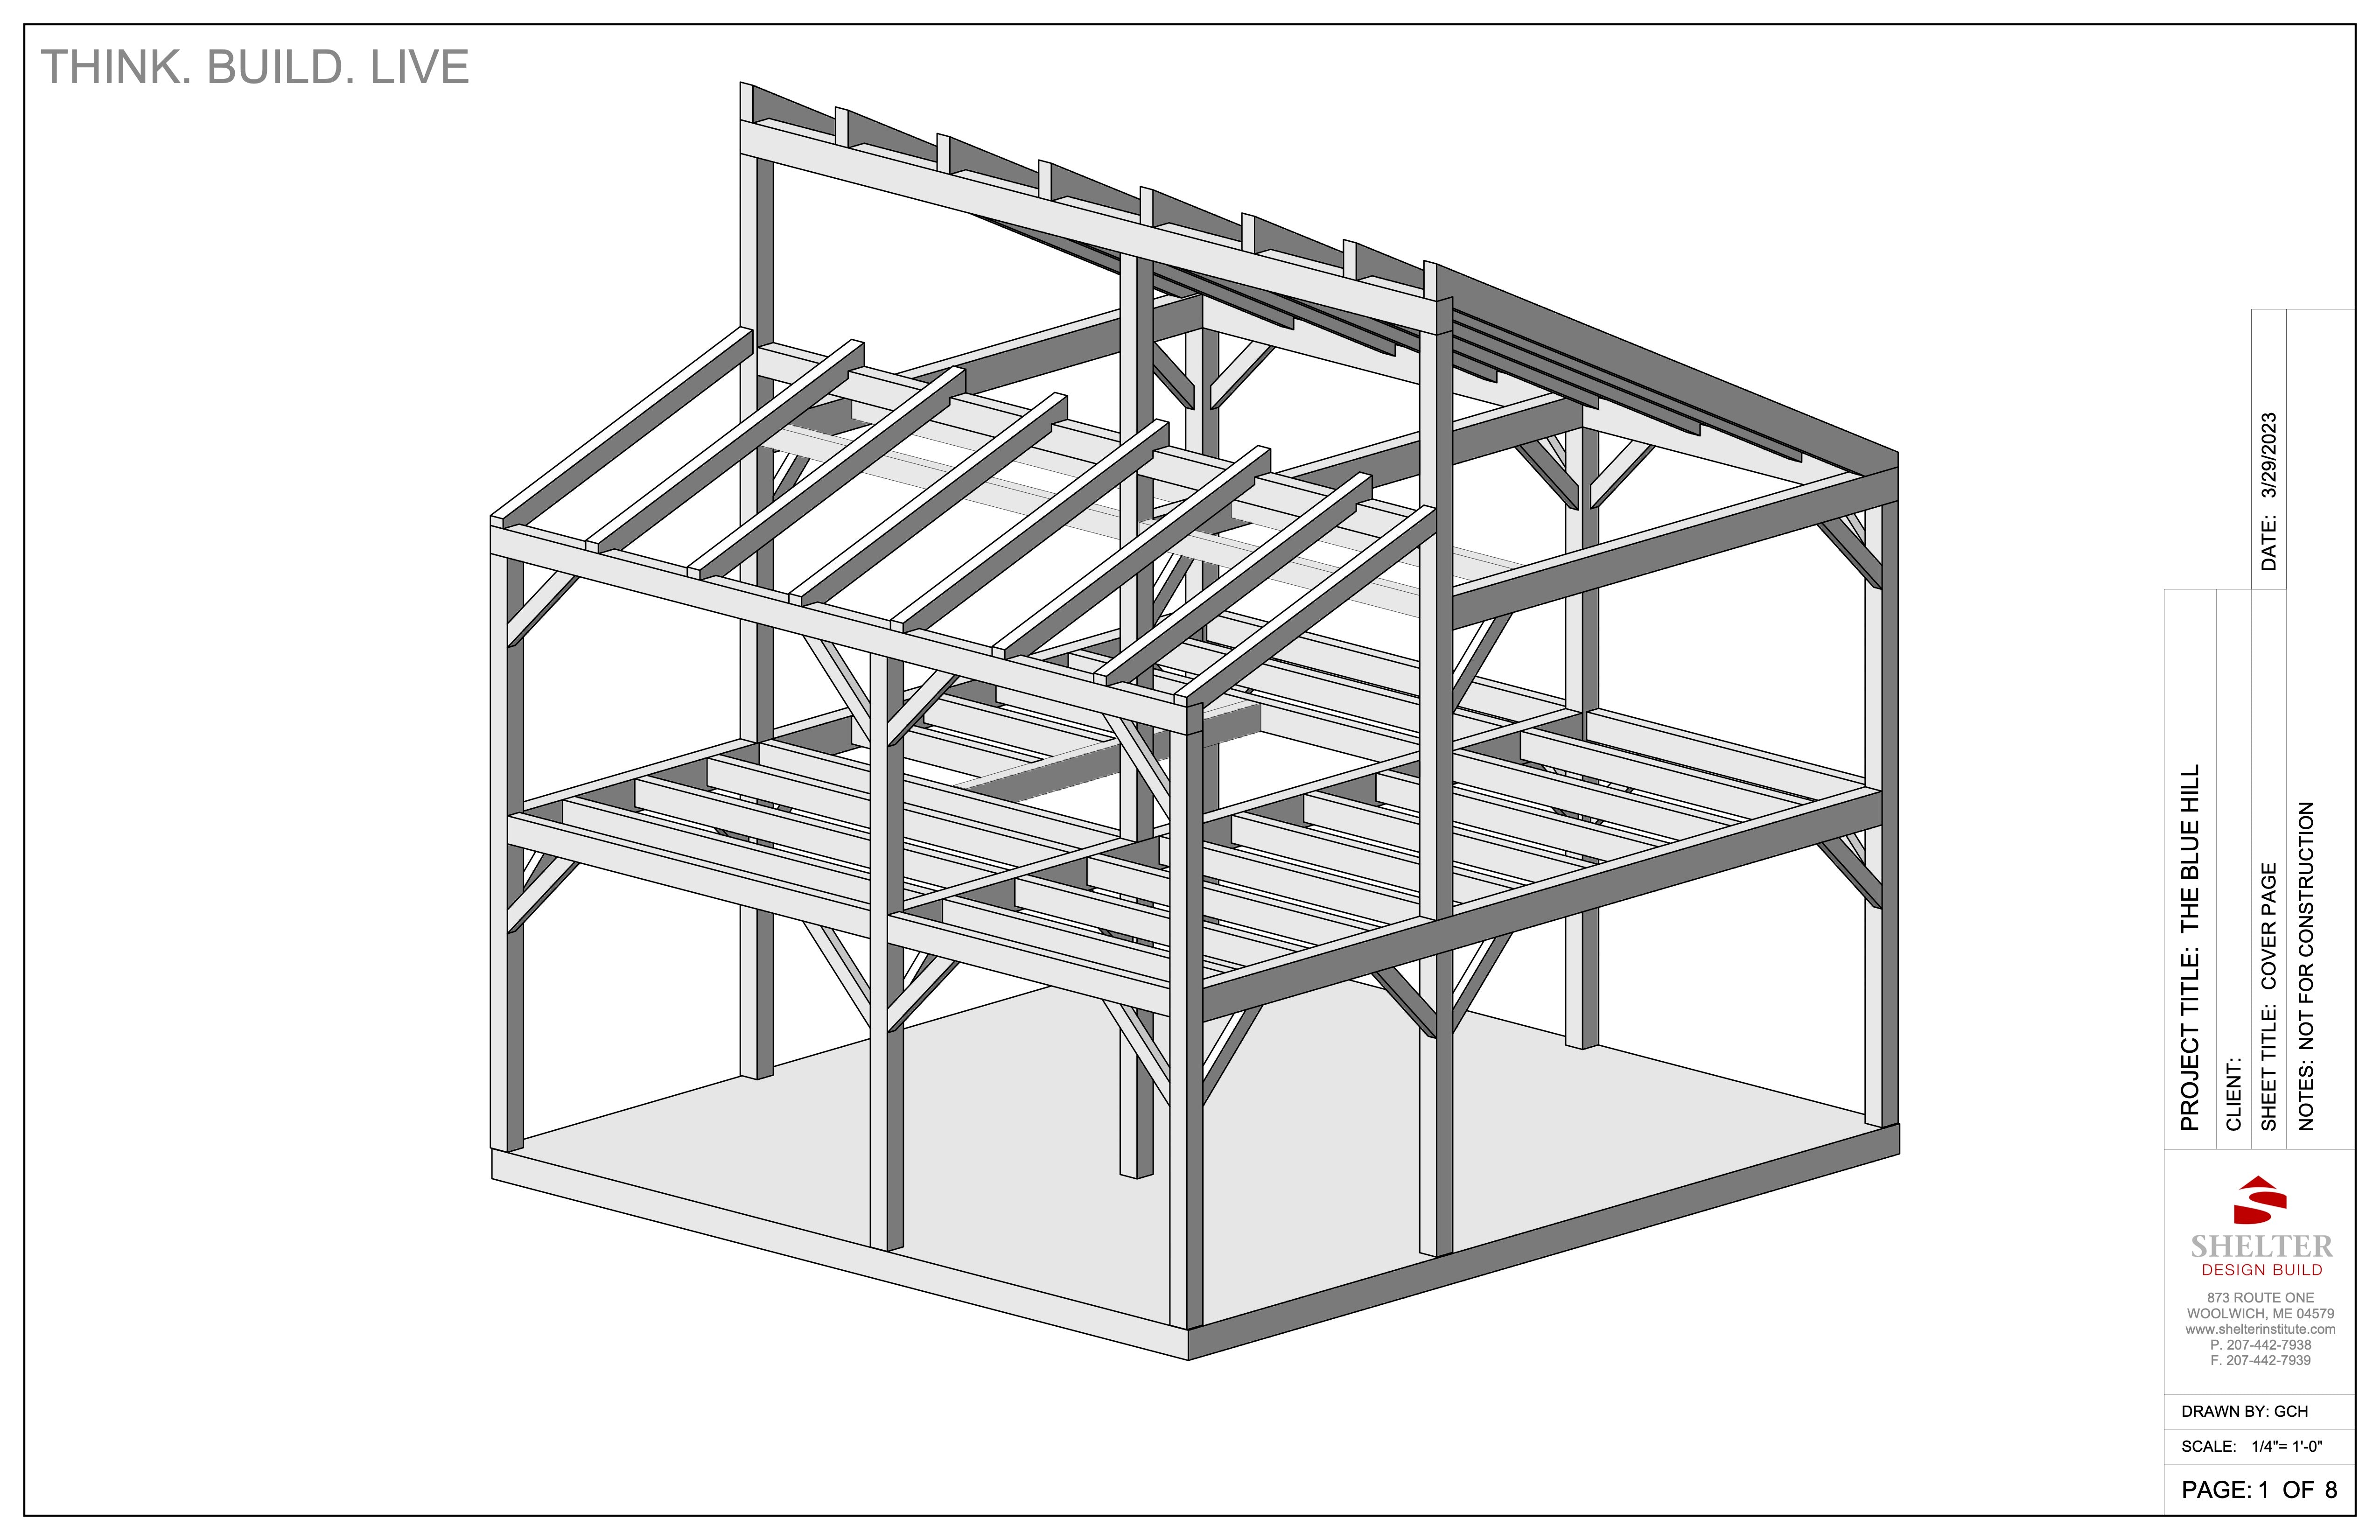 The Blue Hill: Timber Frame Cut Sheet Package 28x30 Clerestory